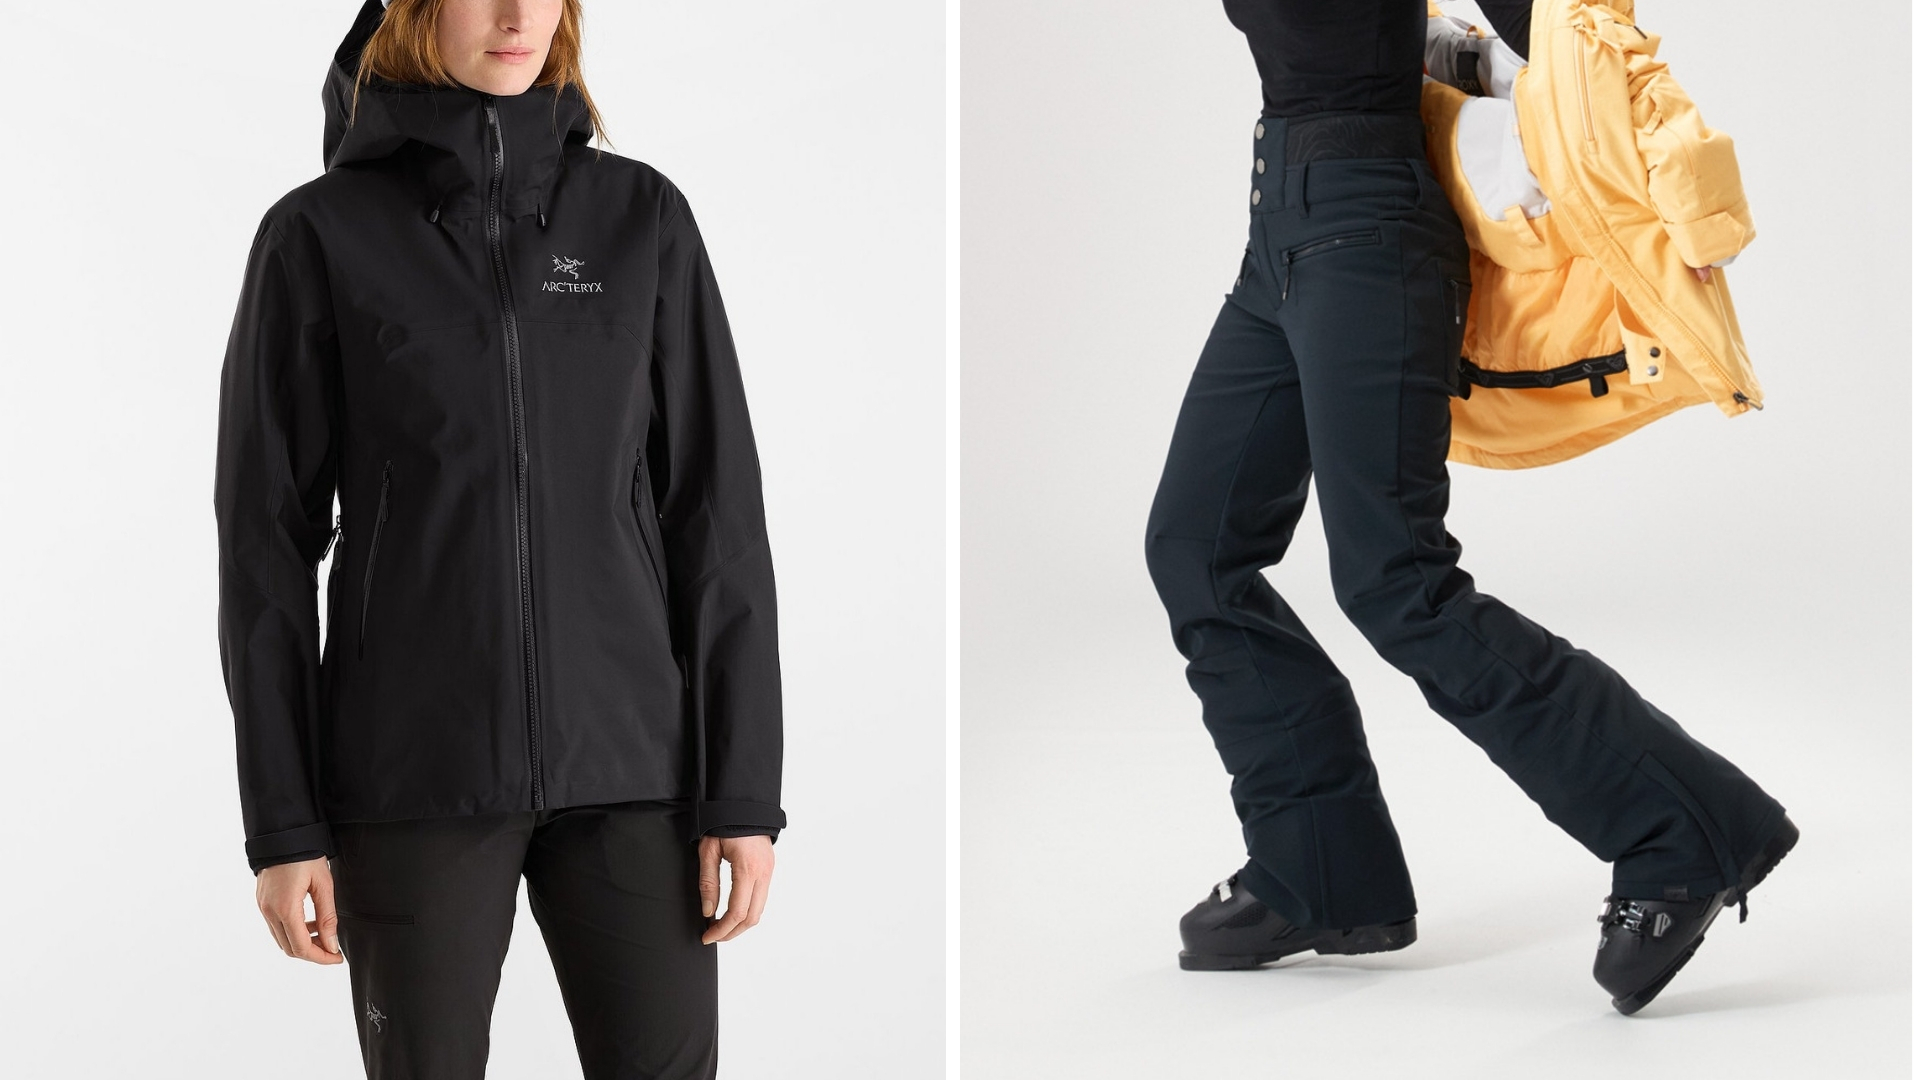 9 Pieces Of Winter Activewear And Accessories For When It's Cold Out